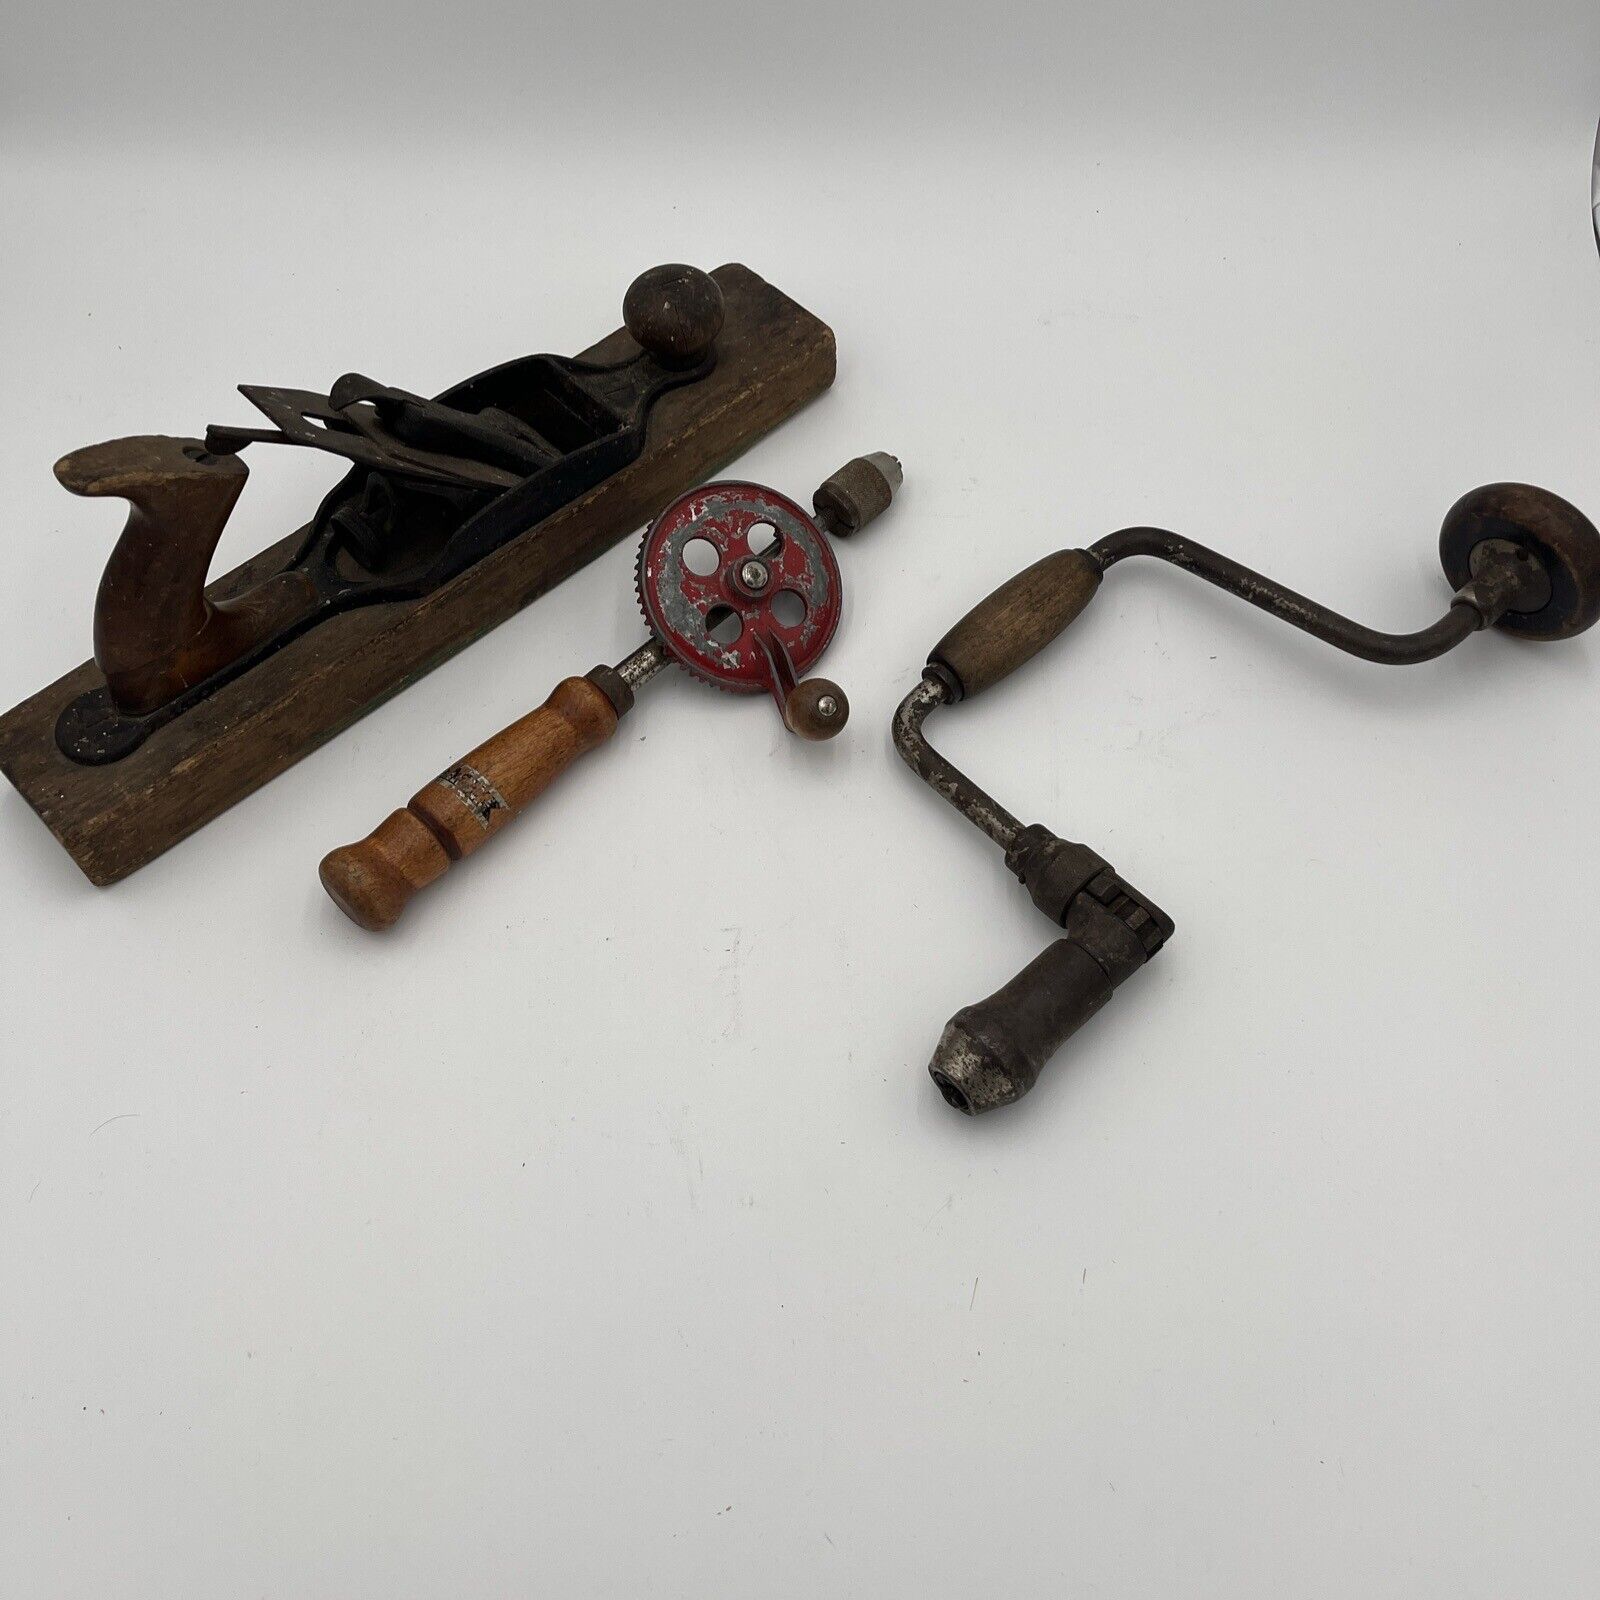 Vintage Wood Plane Hand Drills Auger Style Lot Of Three Antique Hand Tools Nice